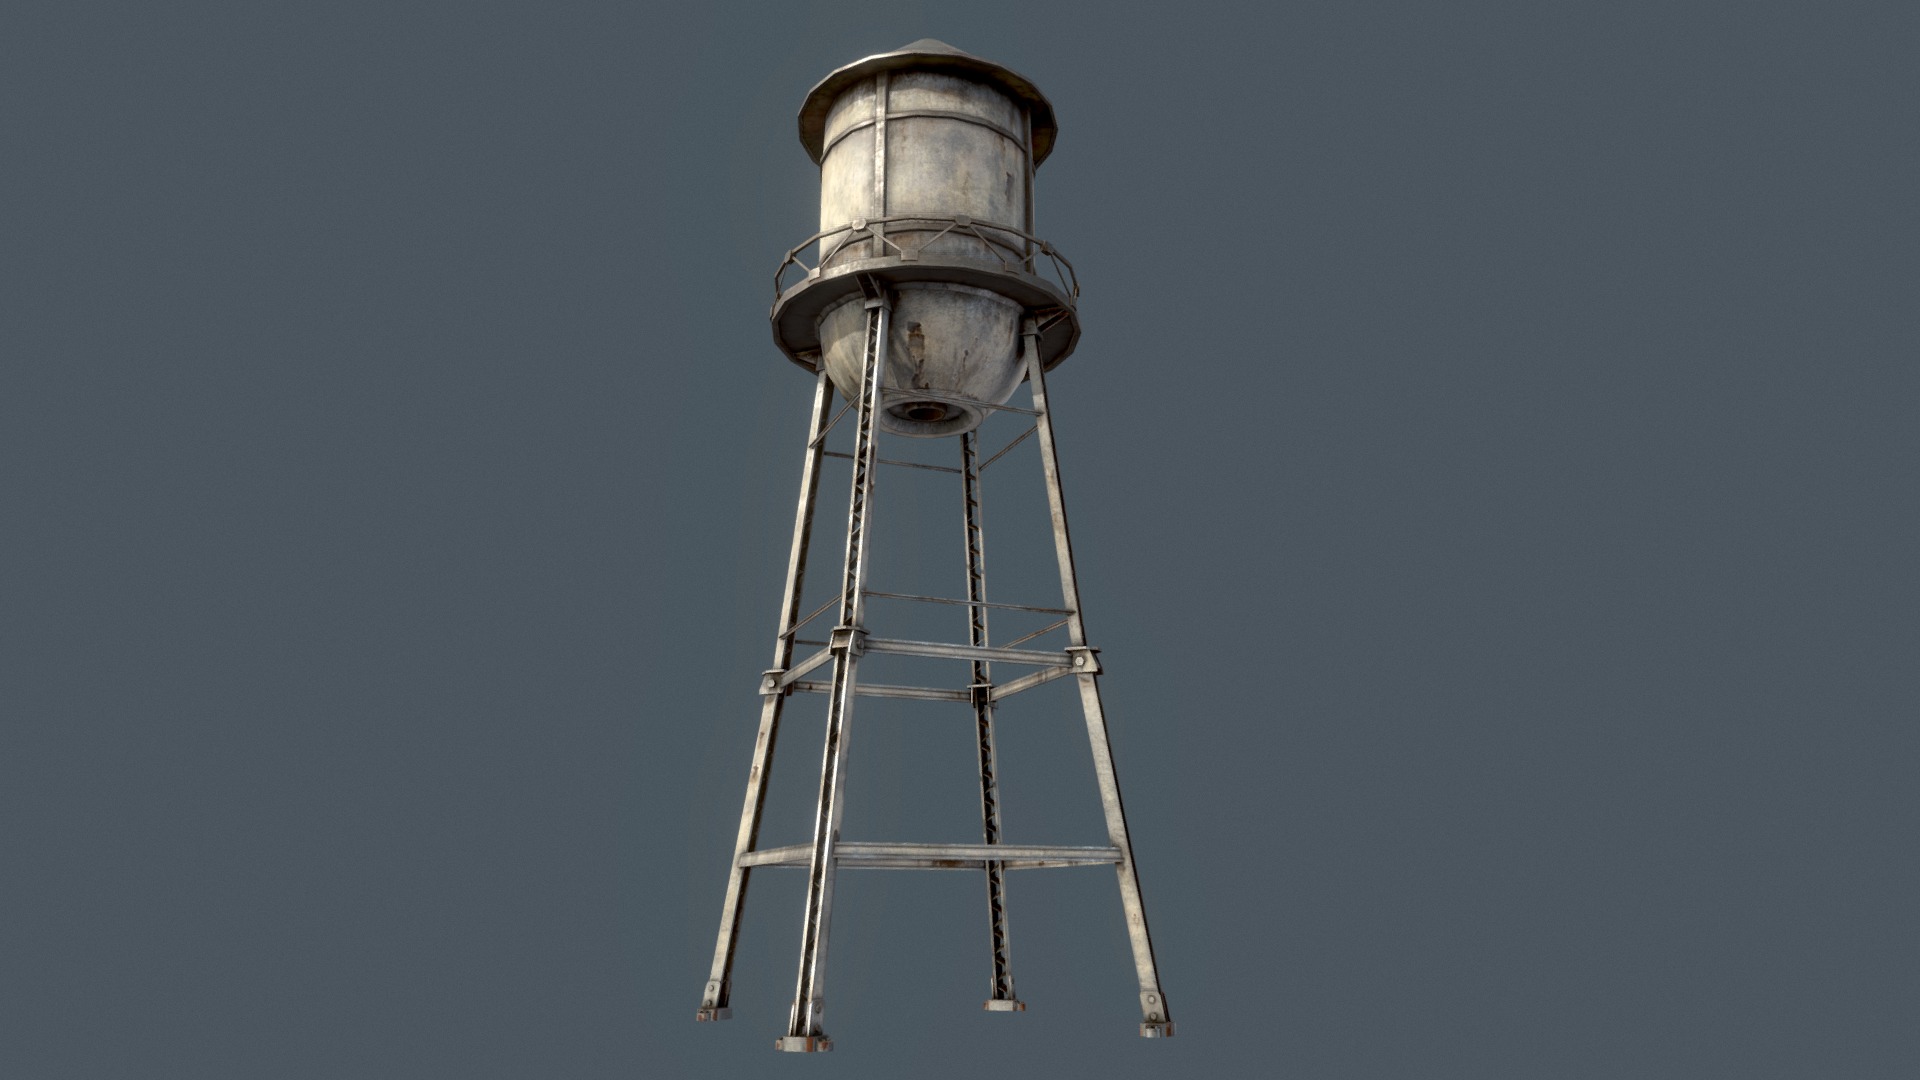 3D model Old Water Tower PBR - This is a 3D model of the Old Water Tower PBR. The 3D model is about a water tower with a water tank.